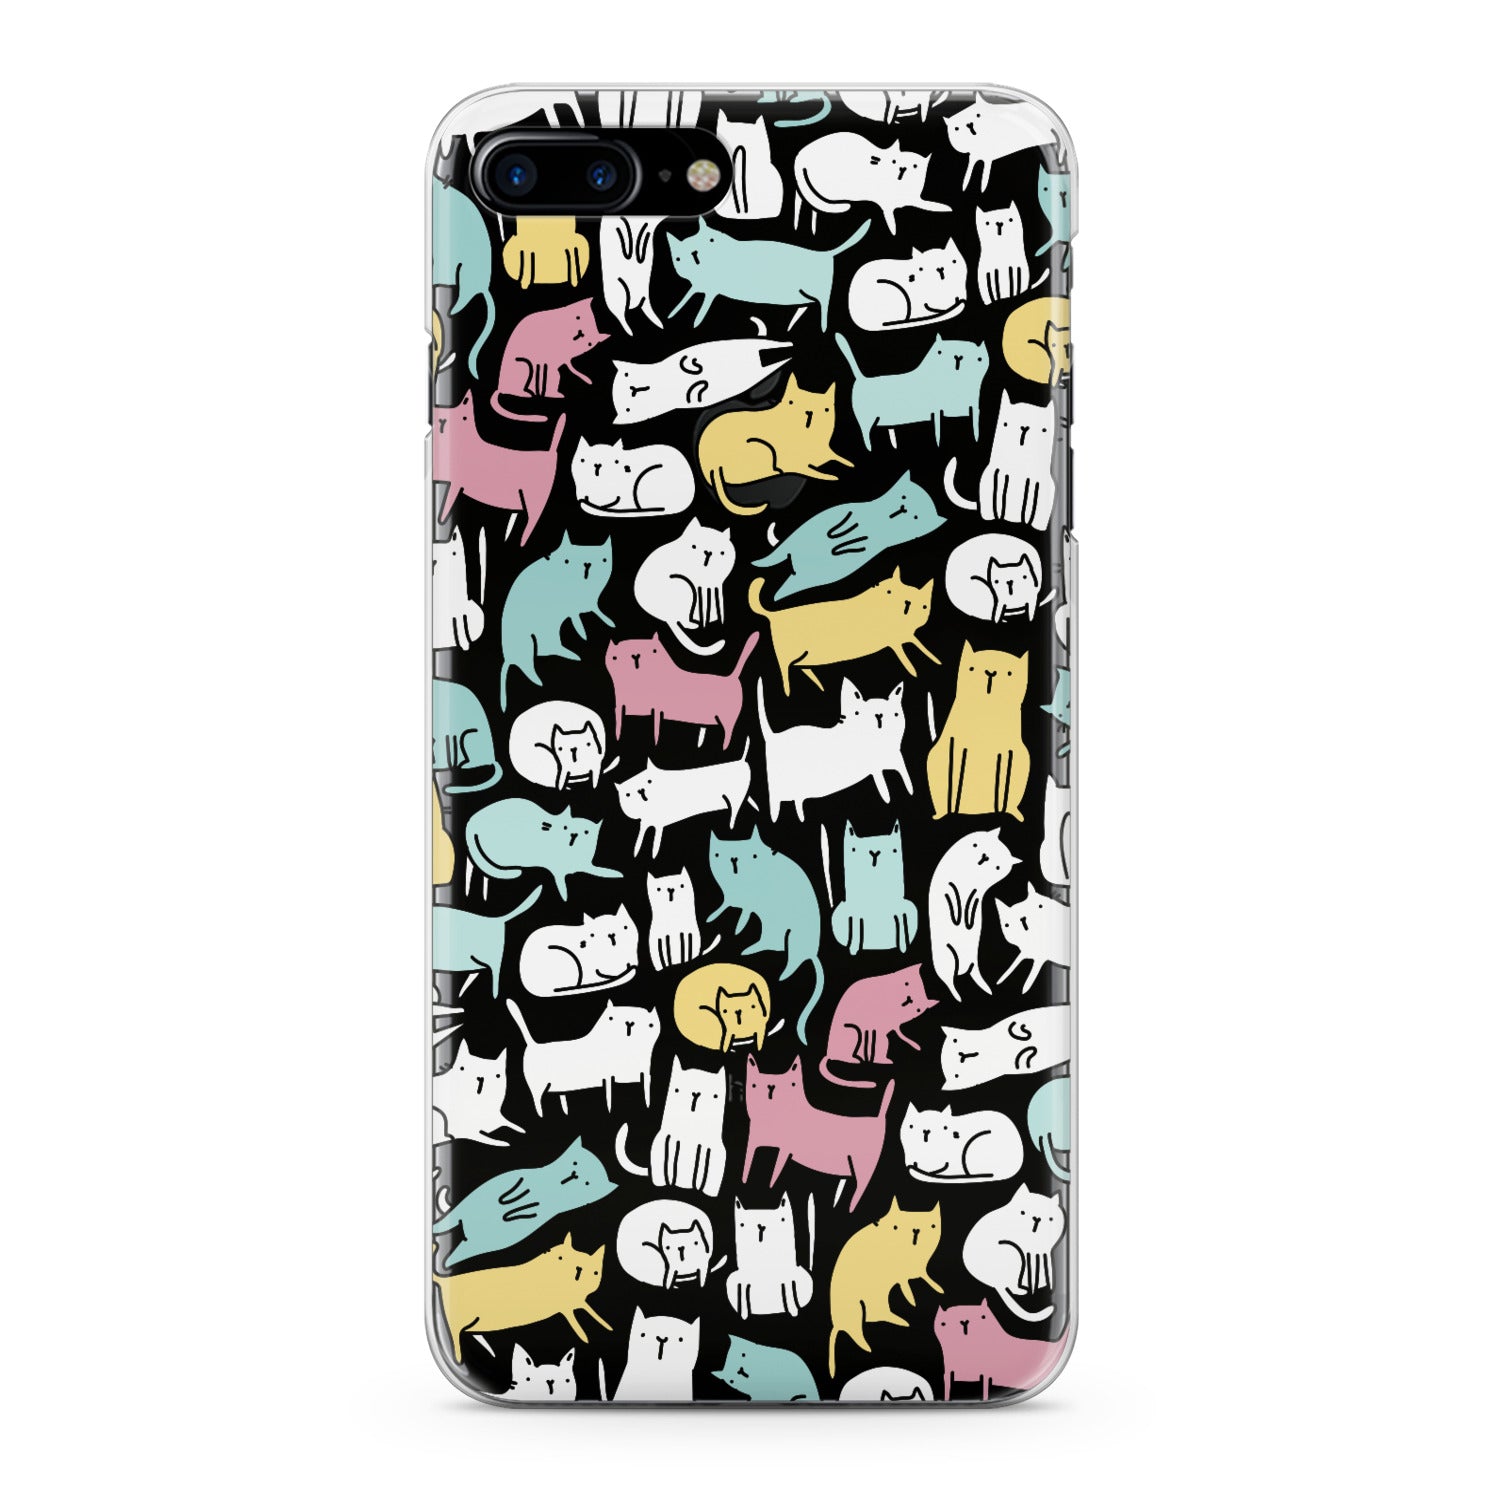 Lex Altern Bright Colored Cats Phone Case for your iPhone & Android phone.